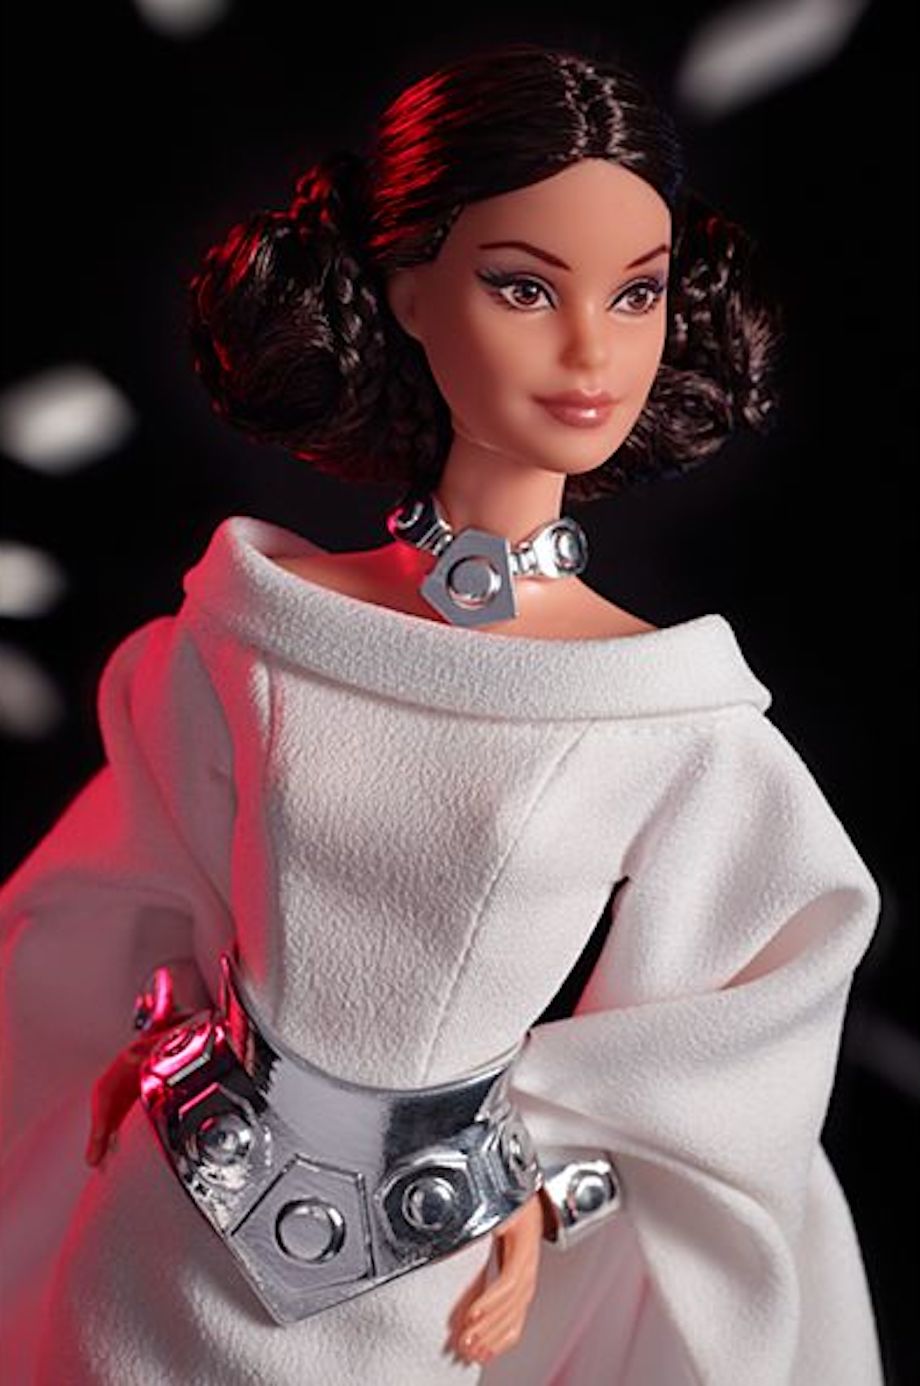 barbie-gets-a-line-of-star-wars-action-figures-that-shows-off-new-fashion-for-darth-vader-r2-d2-and-princess-leia6